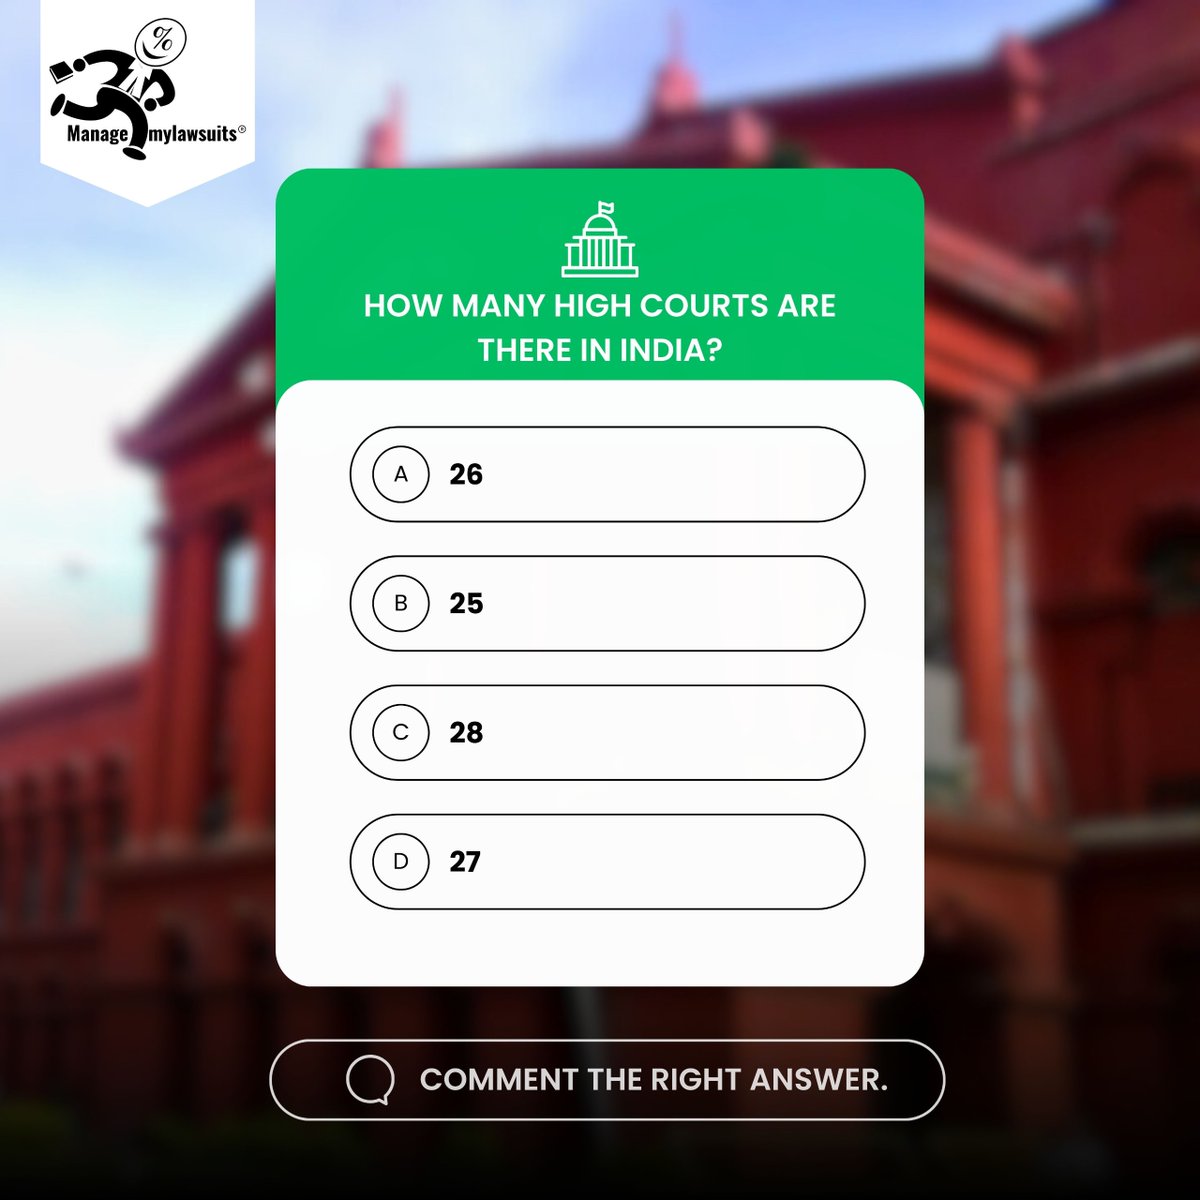 Do you know how many High Courts there are in India? Comment your answer below!

Follow us for more legal insights.

#managemylawsuits #lawfirms #legaldepartment #highcourts #legalinsights